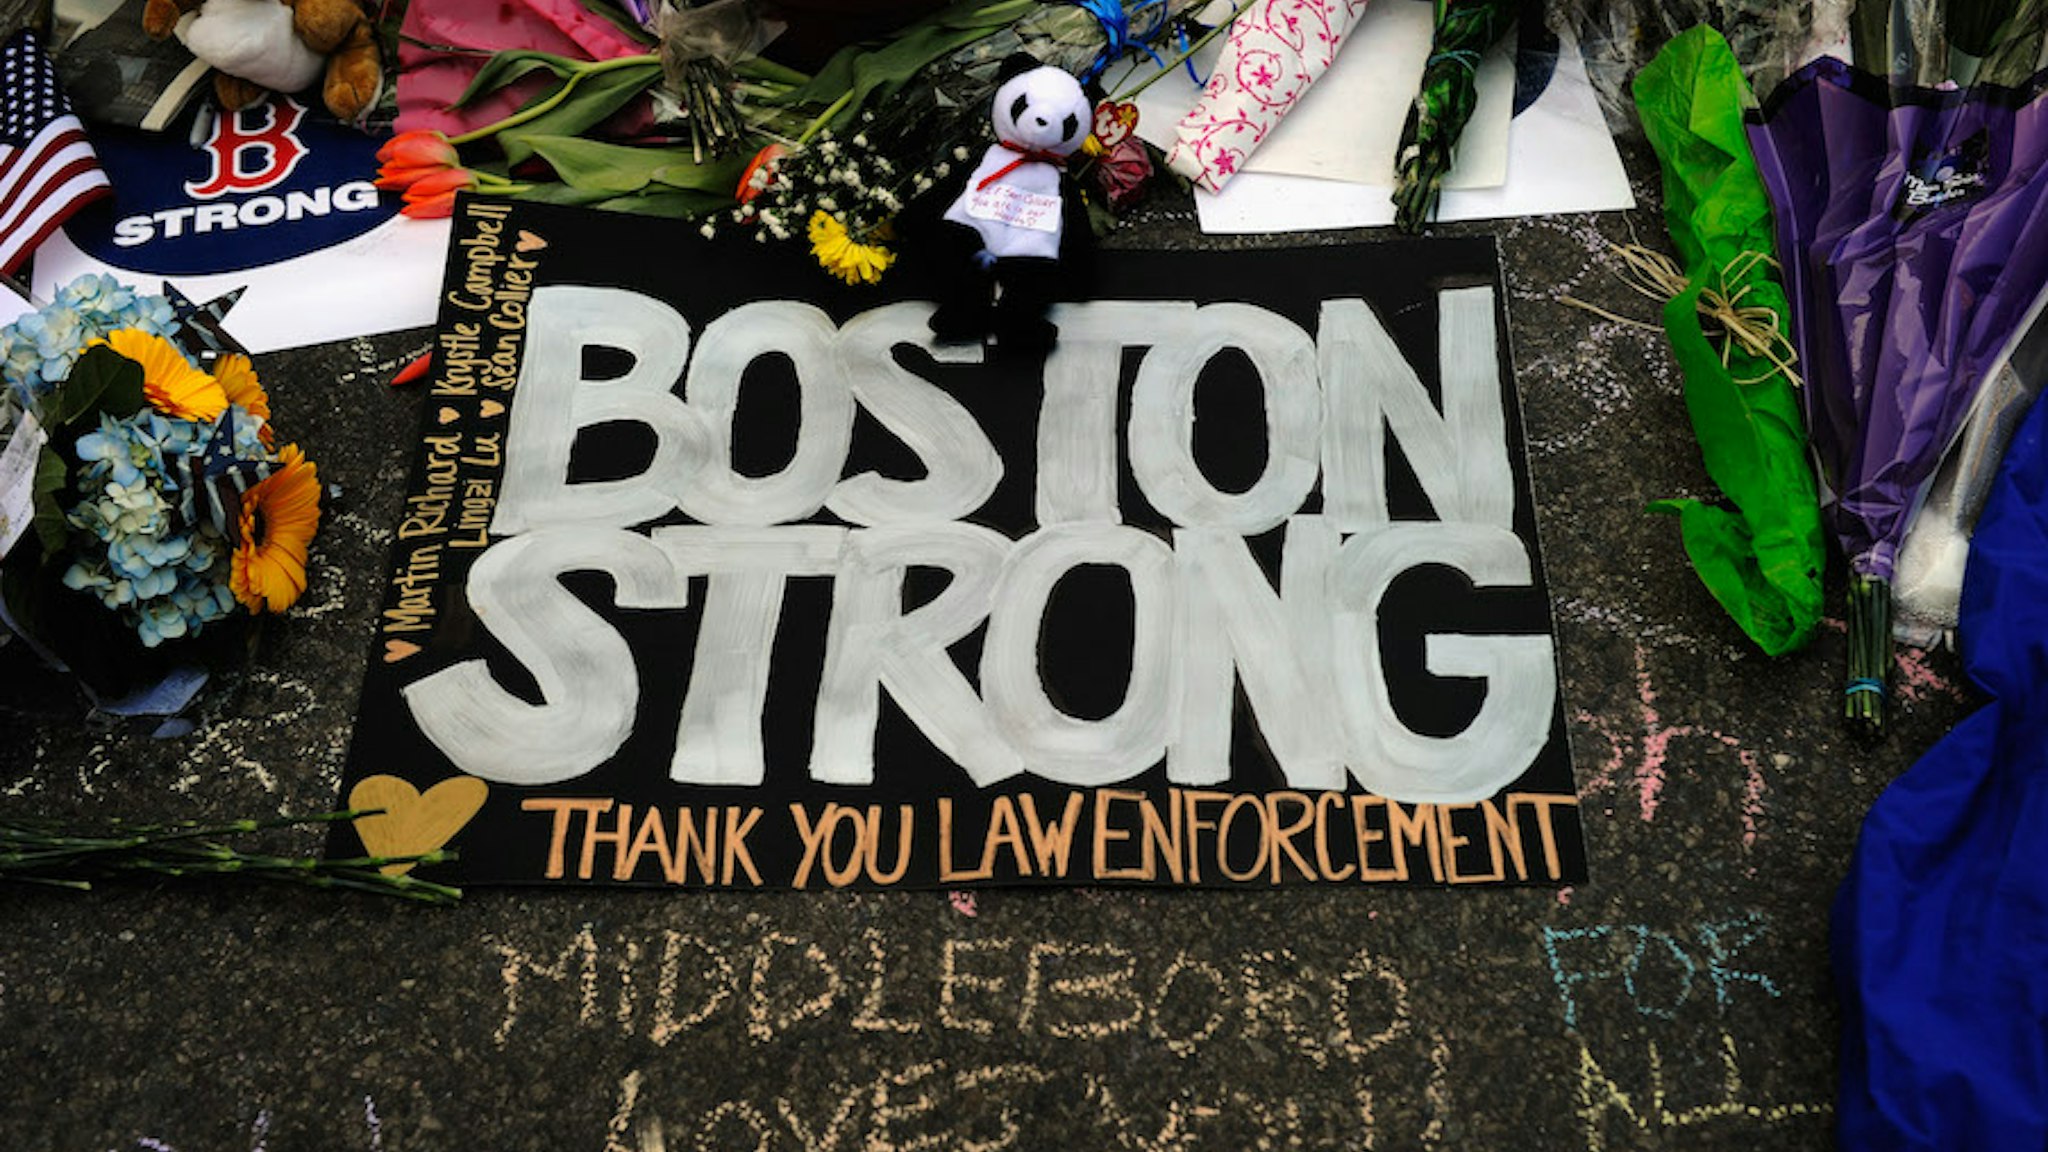 BOSTON, MA - APRIL 21: A large sign with the names of the Boston Marathon bombing victims and thanking law enforcement is placed by a Boston Bruins hockey team fan at a makeshift memorial for victims near the site of the bombings at the intersection of Boylston Street and Berkley Street two days after the second suspect was captured on April 21, 2013 in Boston,Massachusetts. A manhunt for Dzhokhar A. Tsarnaev, 19, a suspect in the Boston Marathon bombing ended after he was apprehended on a boat parked on a residential property in Watertown, Massachusetts. His brother Tamerlan Tsarnaev, 26, the other suspect, was shot and killed after a car chase and shootout with police. The bombing, on April 15 at the finish line of the marathon, killed three people and wounded at least 170. (Photo by Kevork Djansezian/Getty Images)